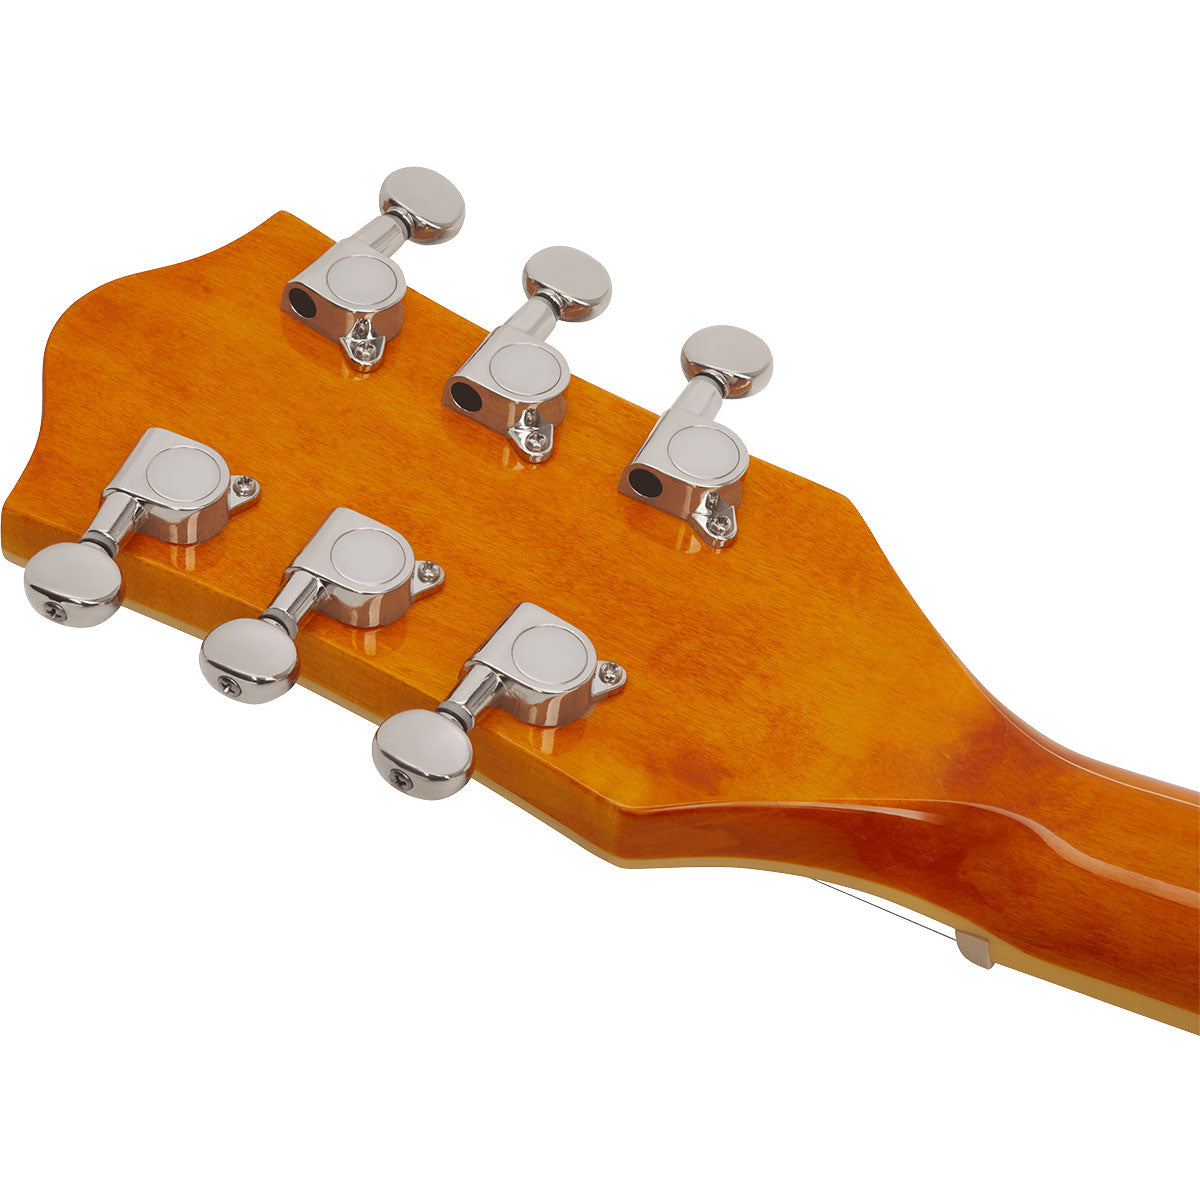 Detail view of Gretsch G5622T Electromatic Center Block Guitar - Speyside showing back of headstock